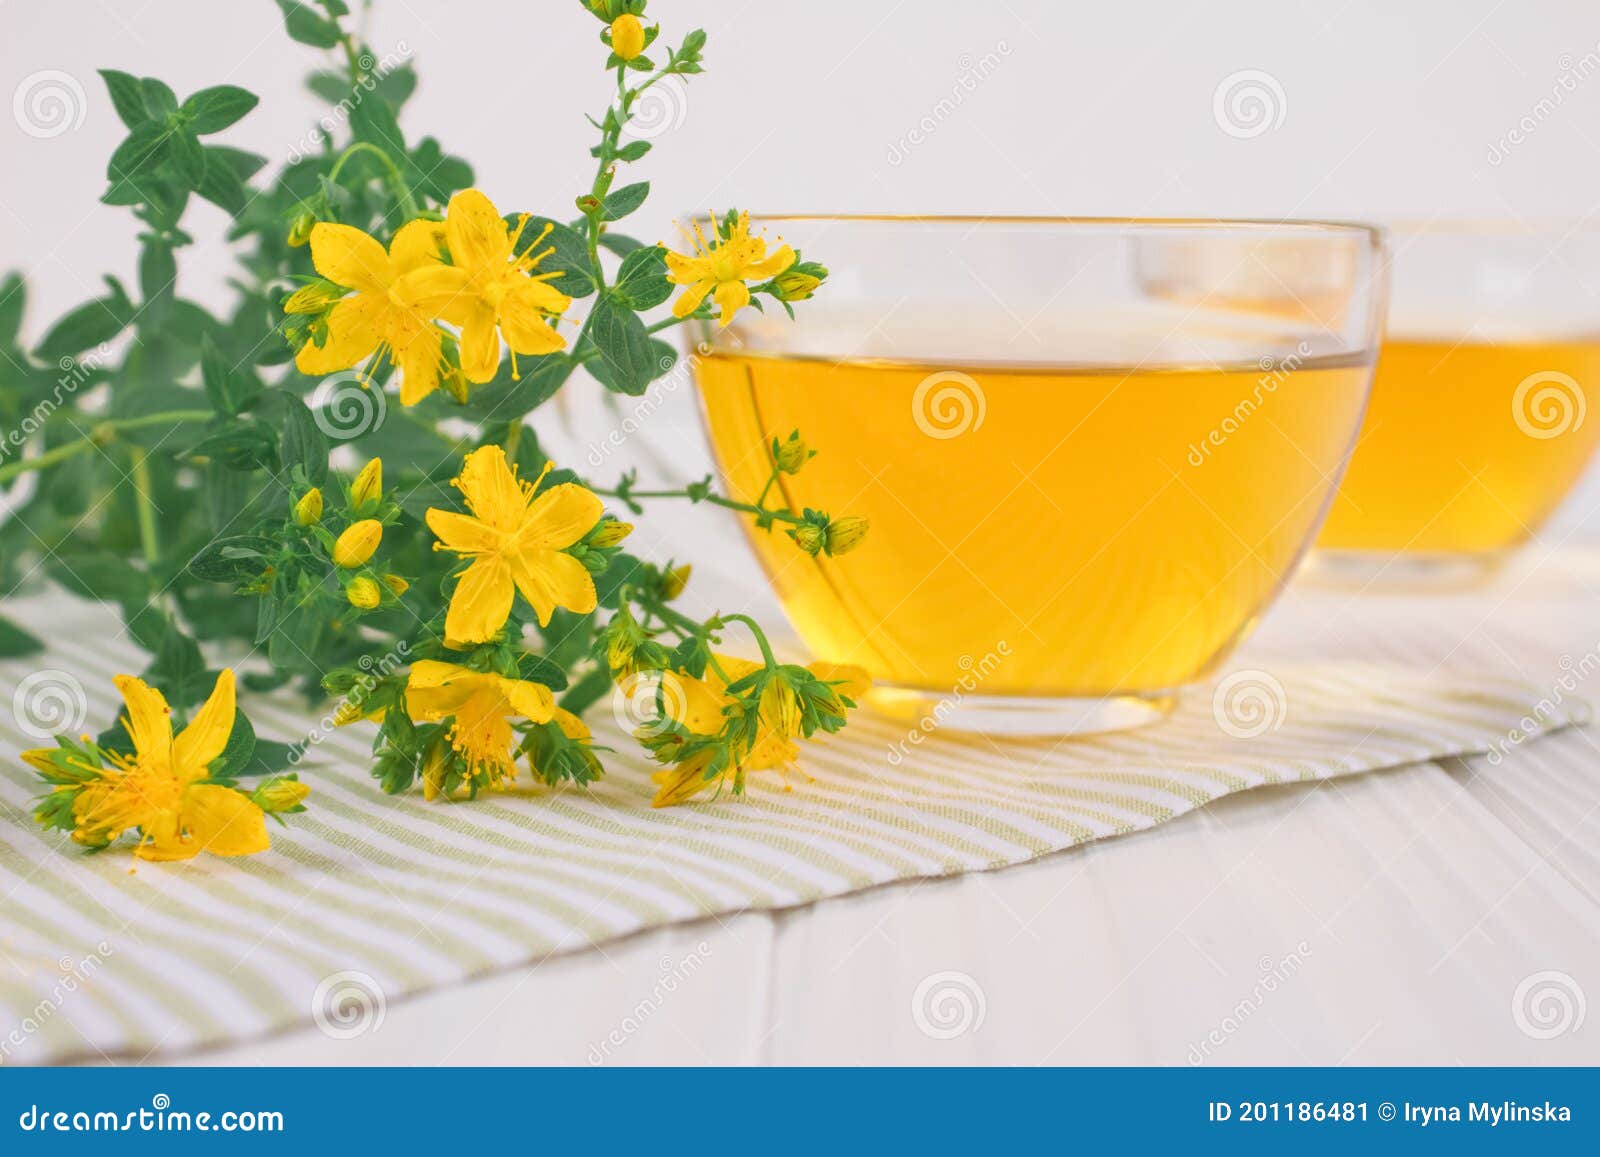 closeup of fresh herbal tea in transparent cups and hypericum flowers on white table. alternative medicine, herbalism